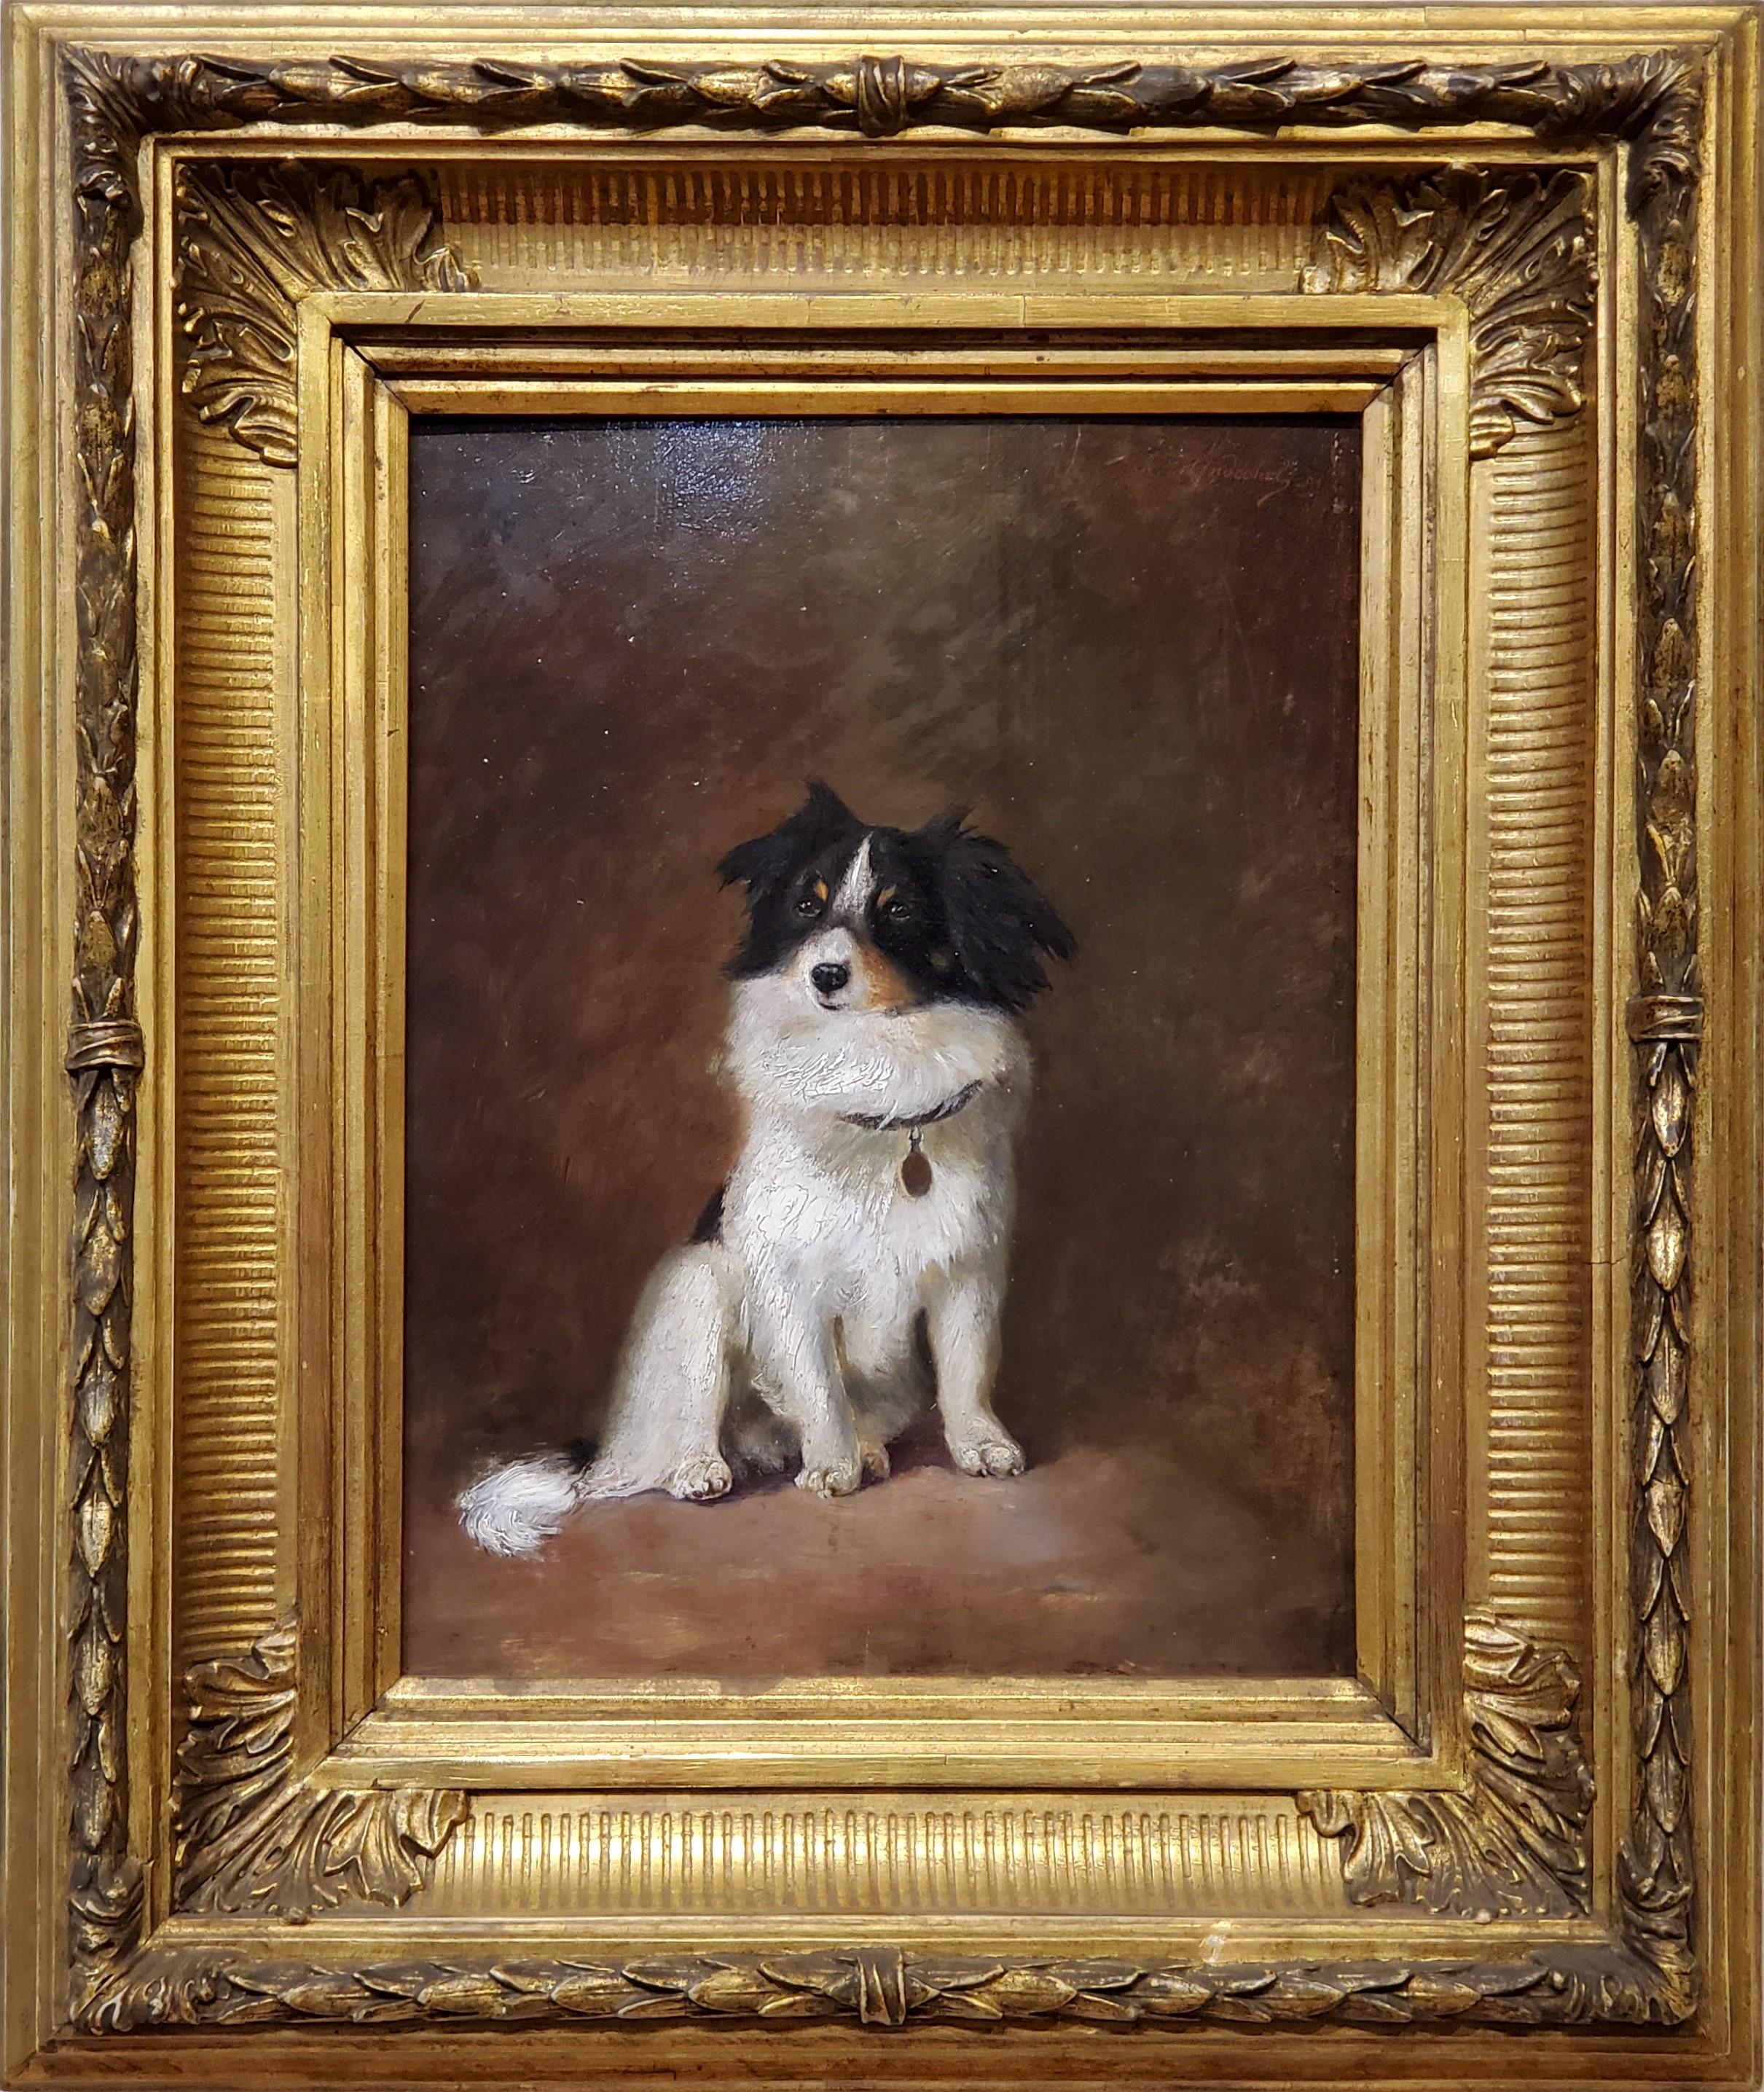 Oil Painting of a Dog by R Hendschel

19th Century Oil on wood panel and measures 11" wide by 15" tall. 

The dog is either an Australian Shephard or a border collie.

This portrait of a dog measures 20" wide by 24" tall in the frame.